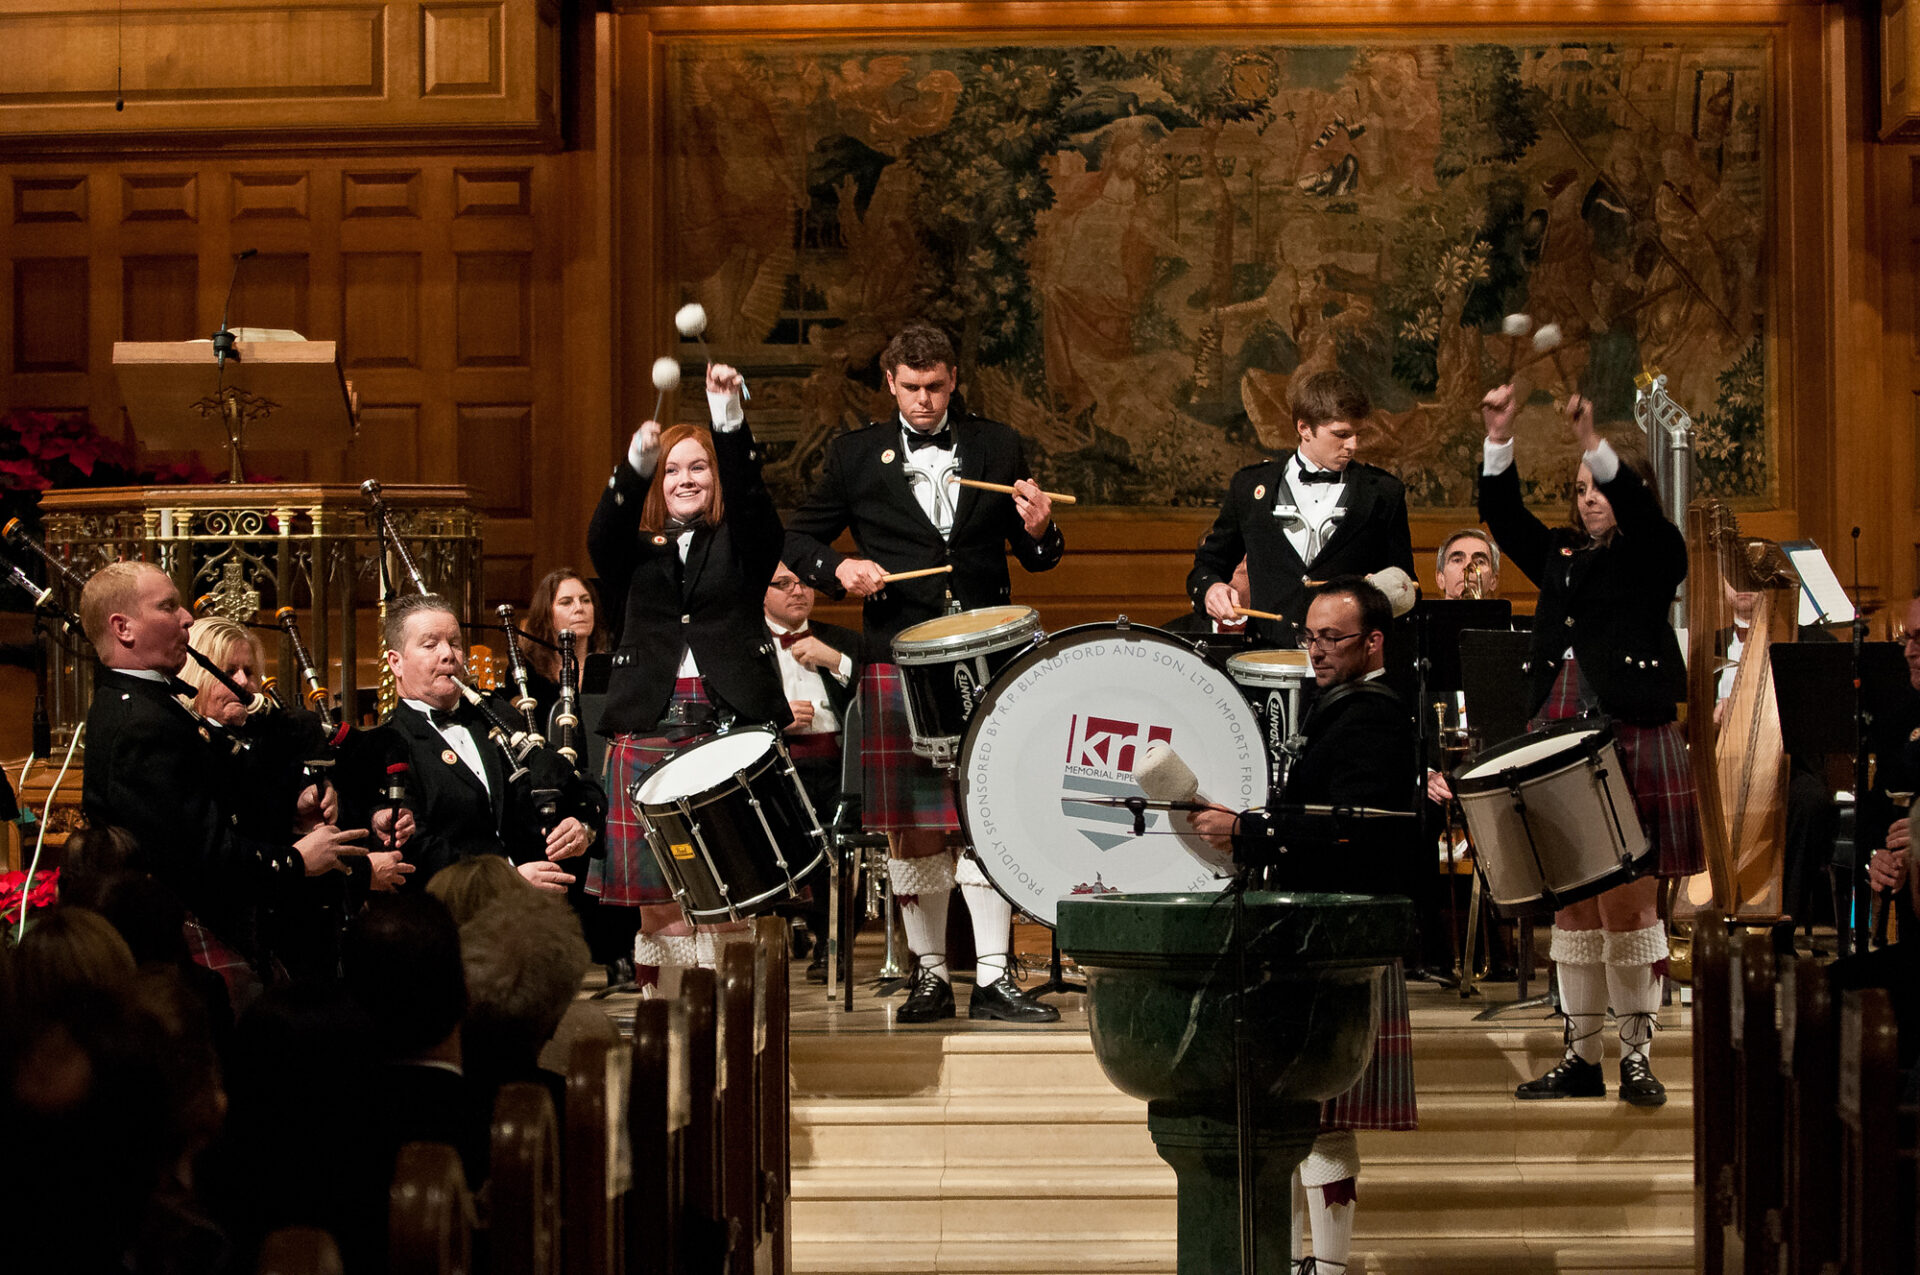 Sep. 25, 2018 – Tickets Now on Sale for 20th Annual Pipes of Christmas